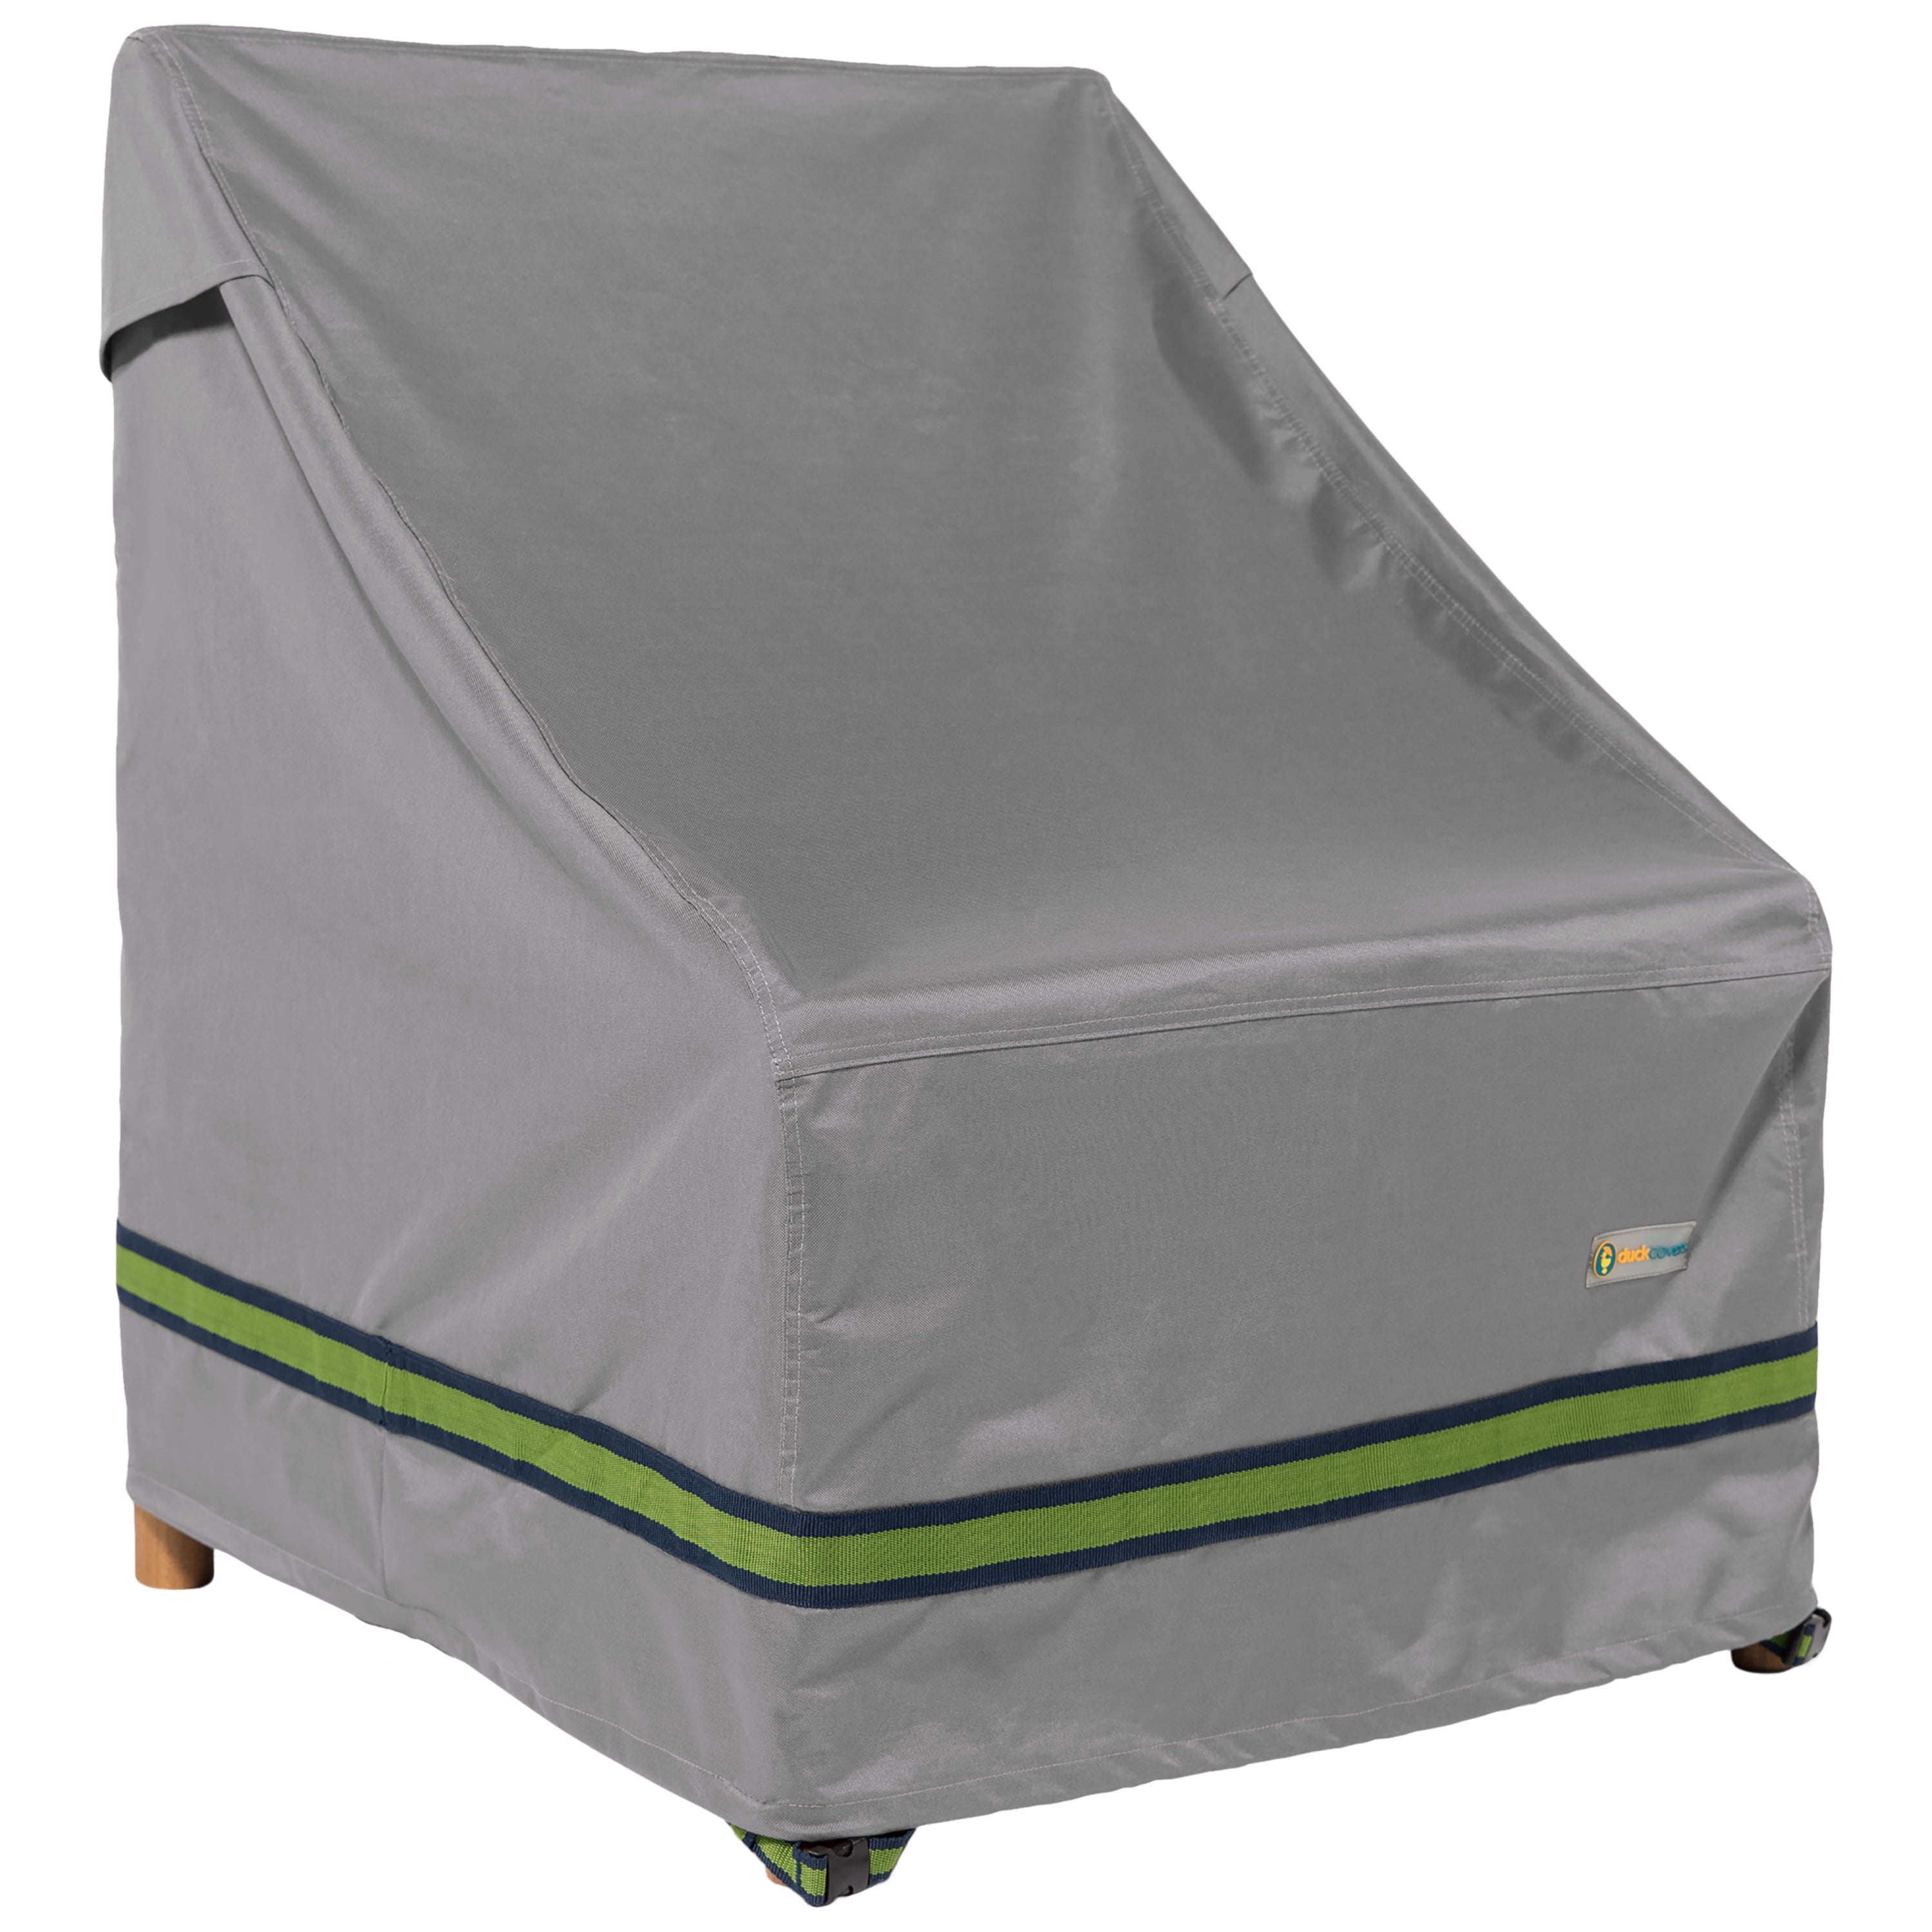 Chair Covers Duck Covers Soteria Rainproof 29 Wide Patio Chair Cover